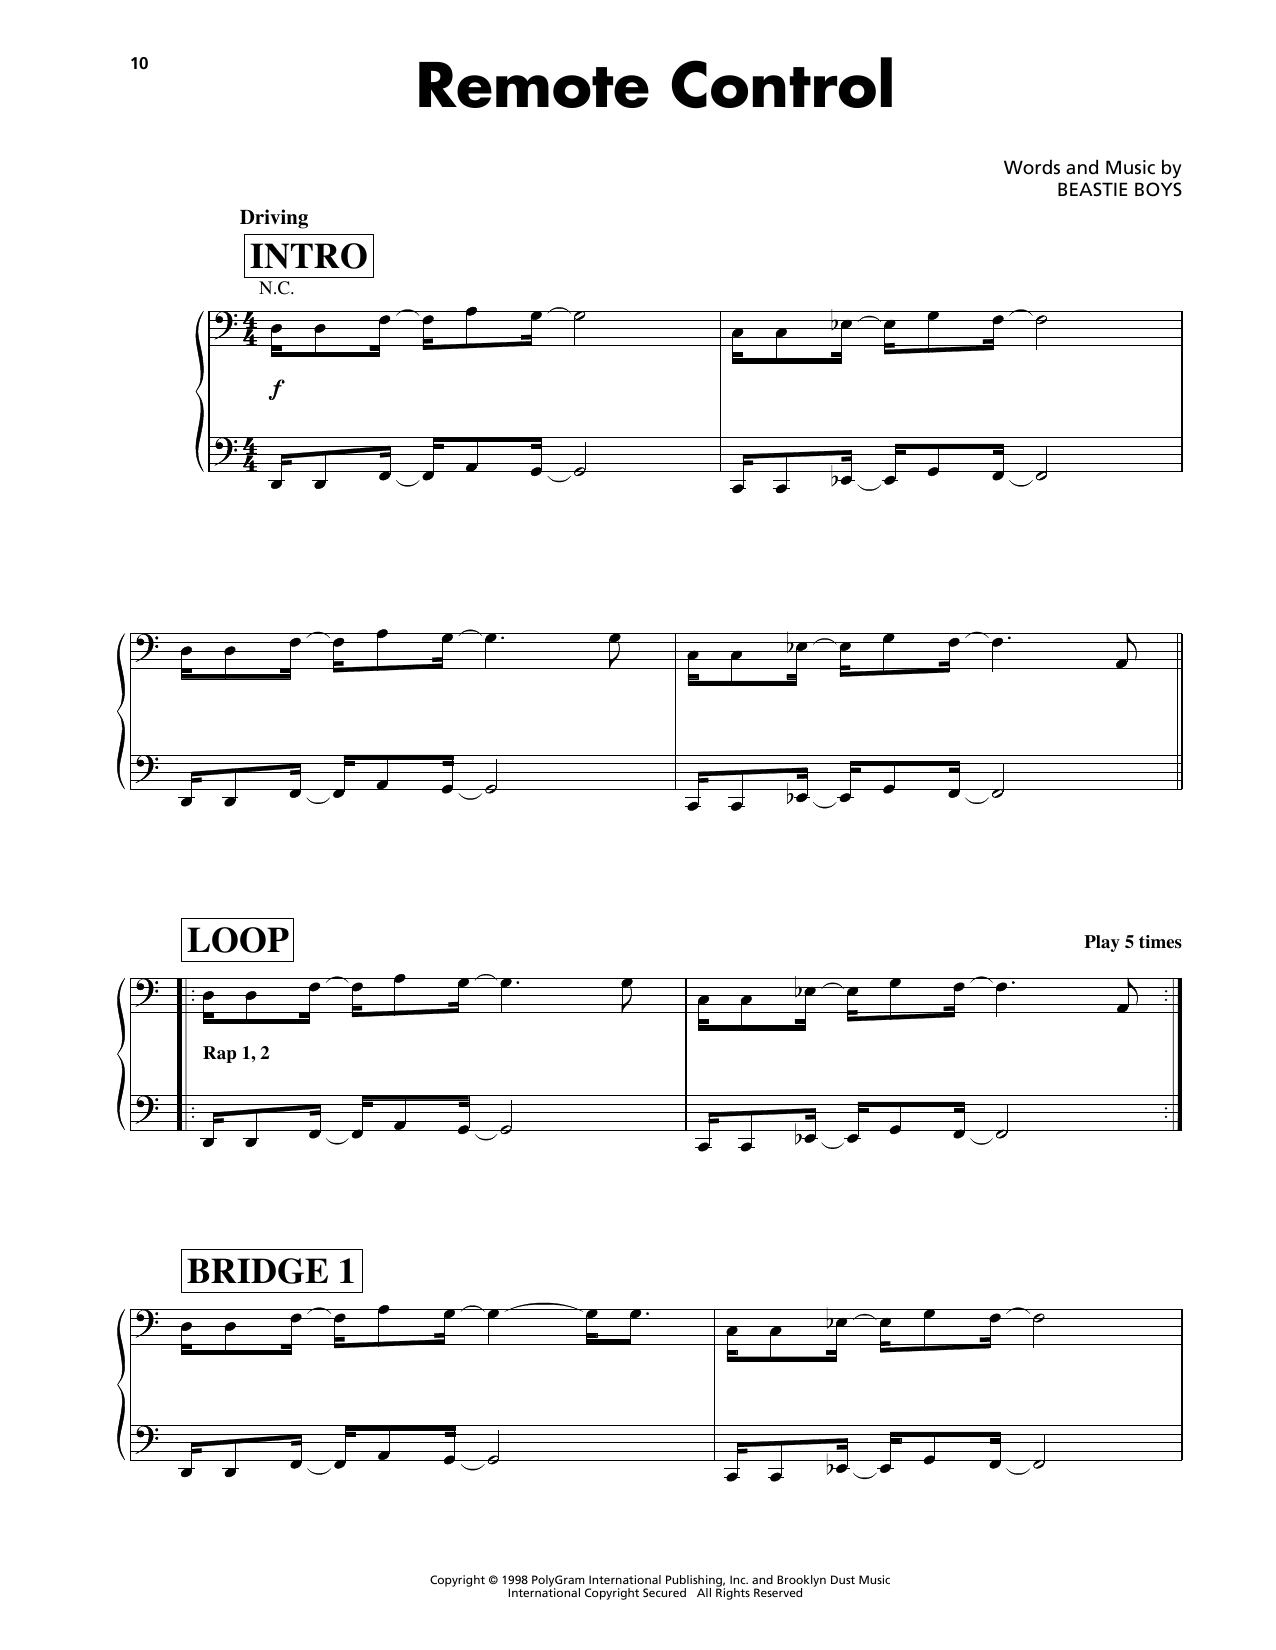 Download Beastie Boys Remote Control Sheet Music